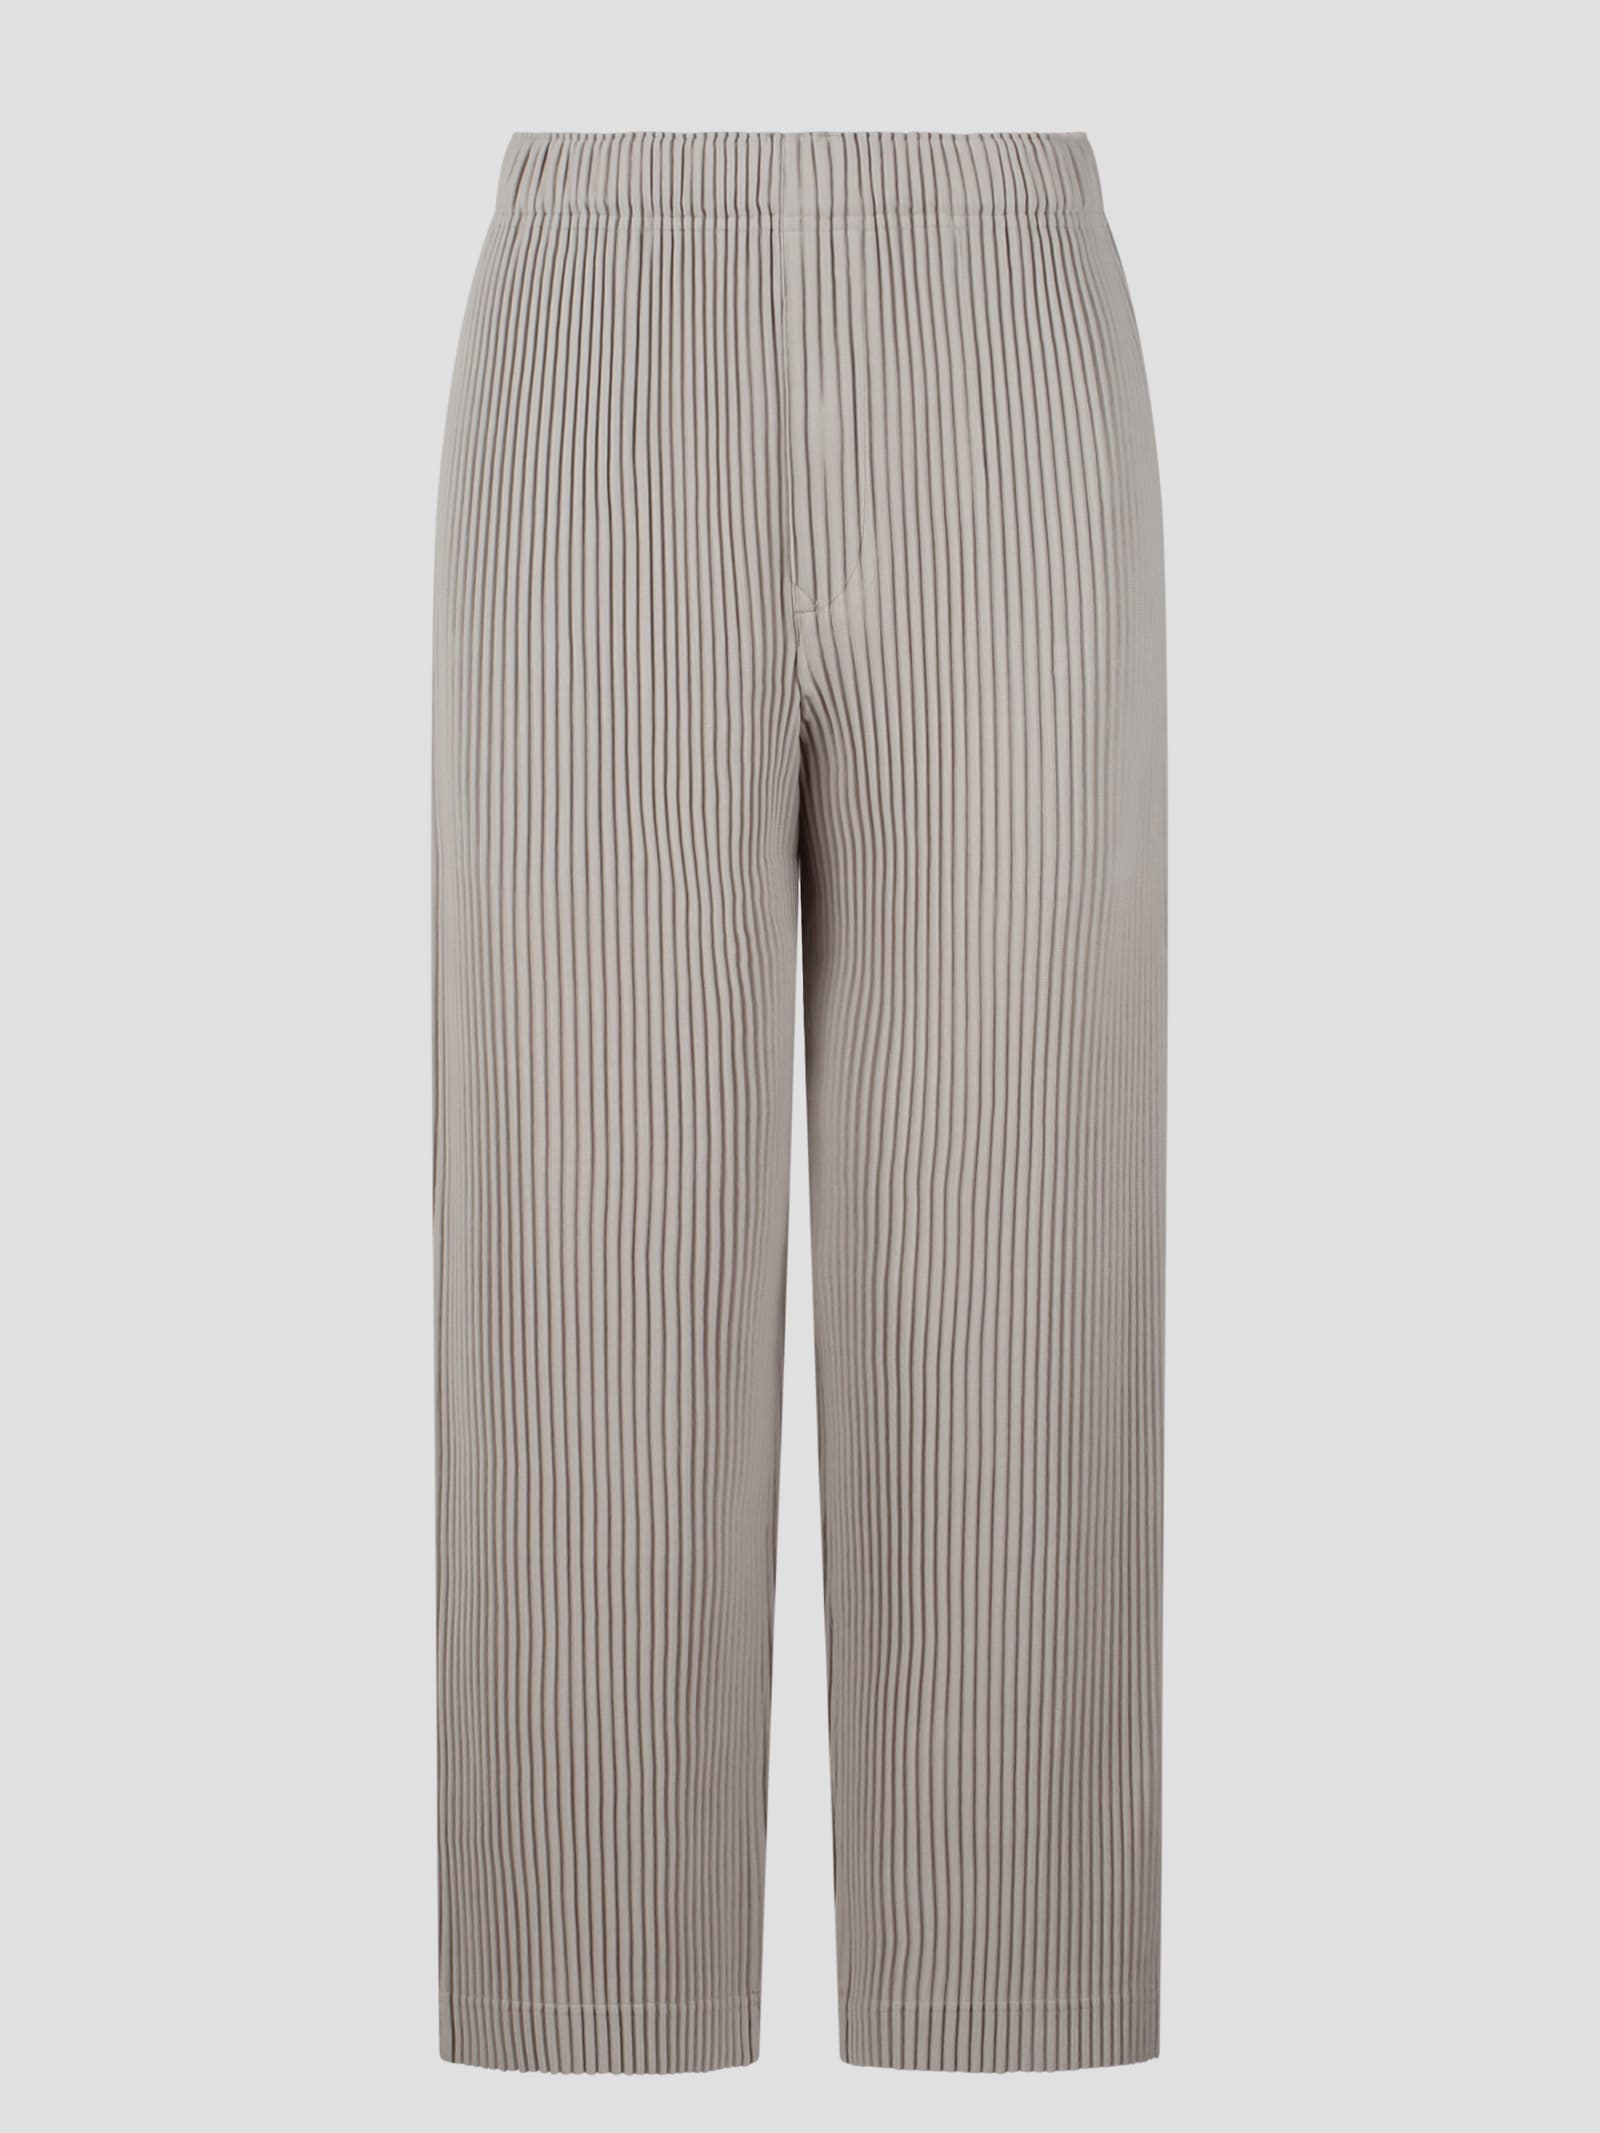 Homme Plissé Issey Miyake Mc March Trousers